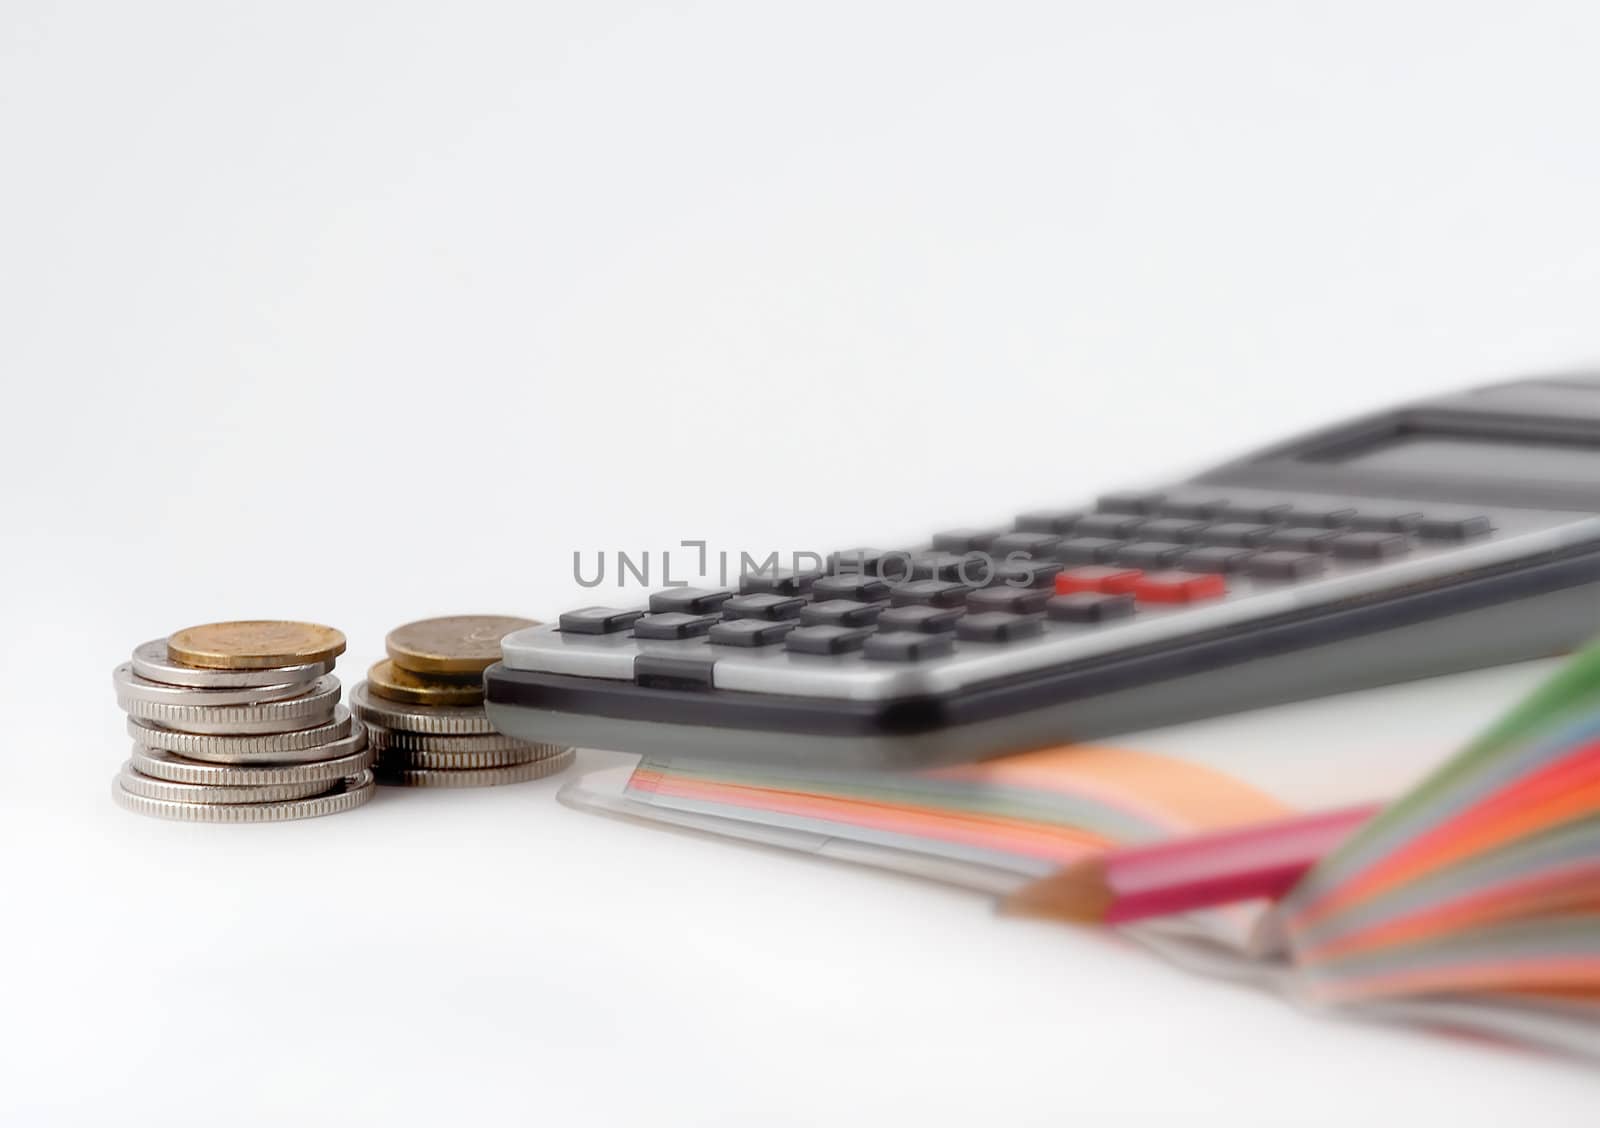 Coins,calculator,notebook and a pen over white background